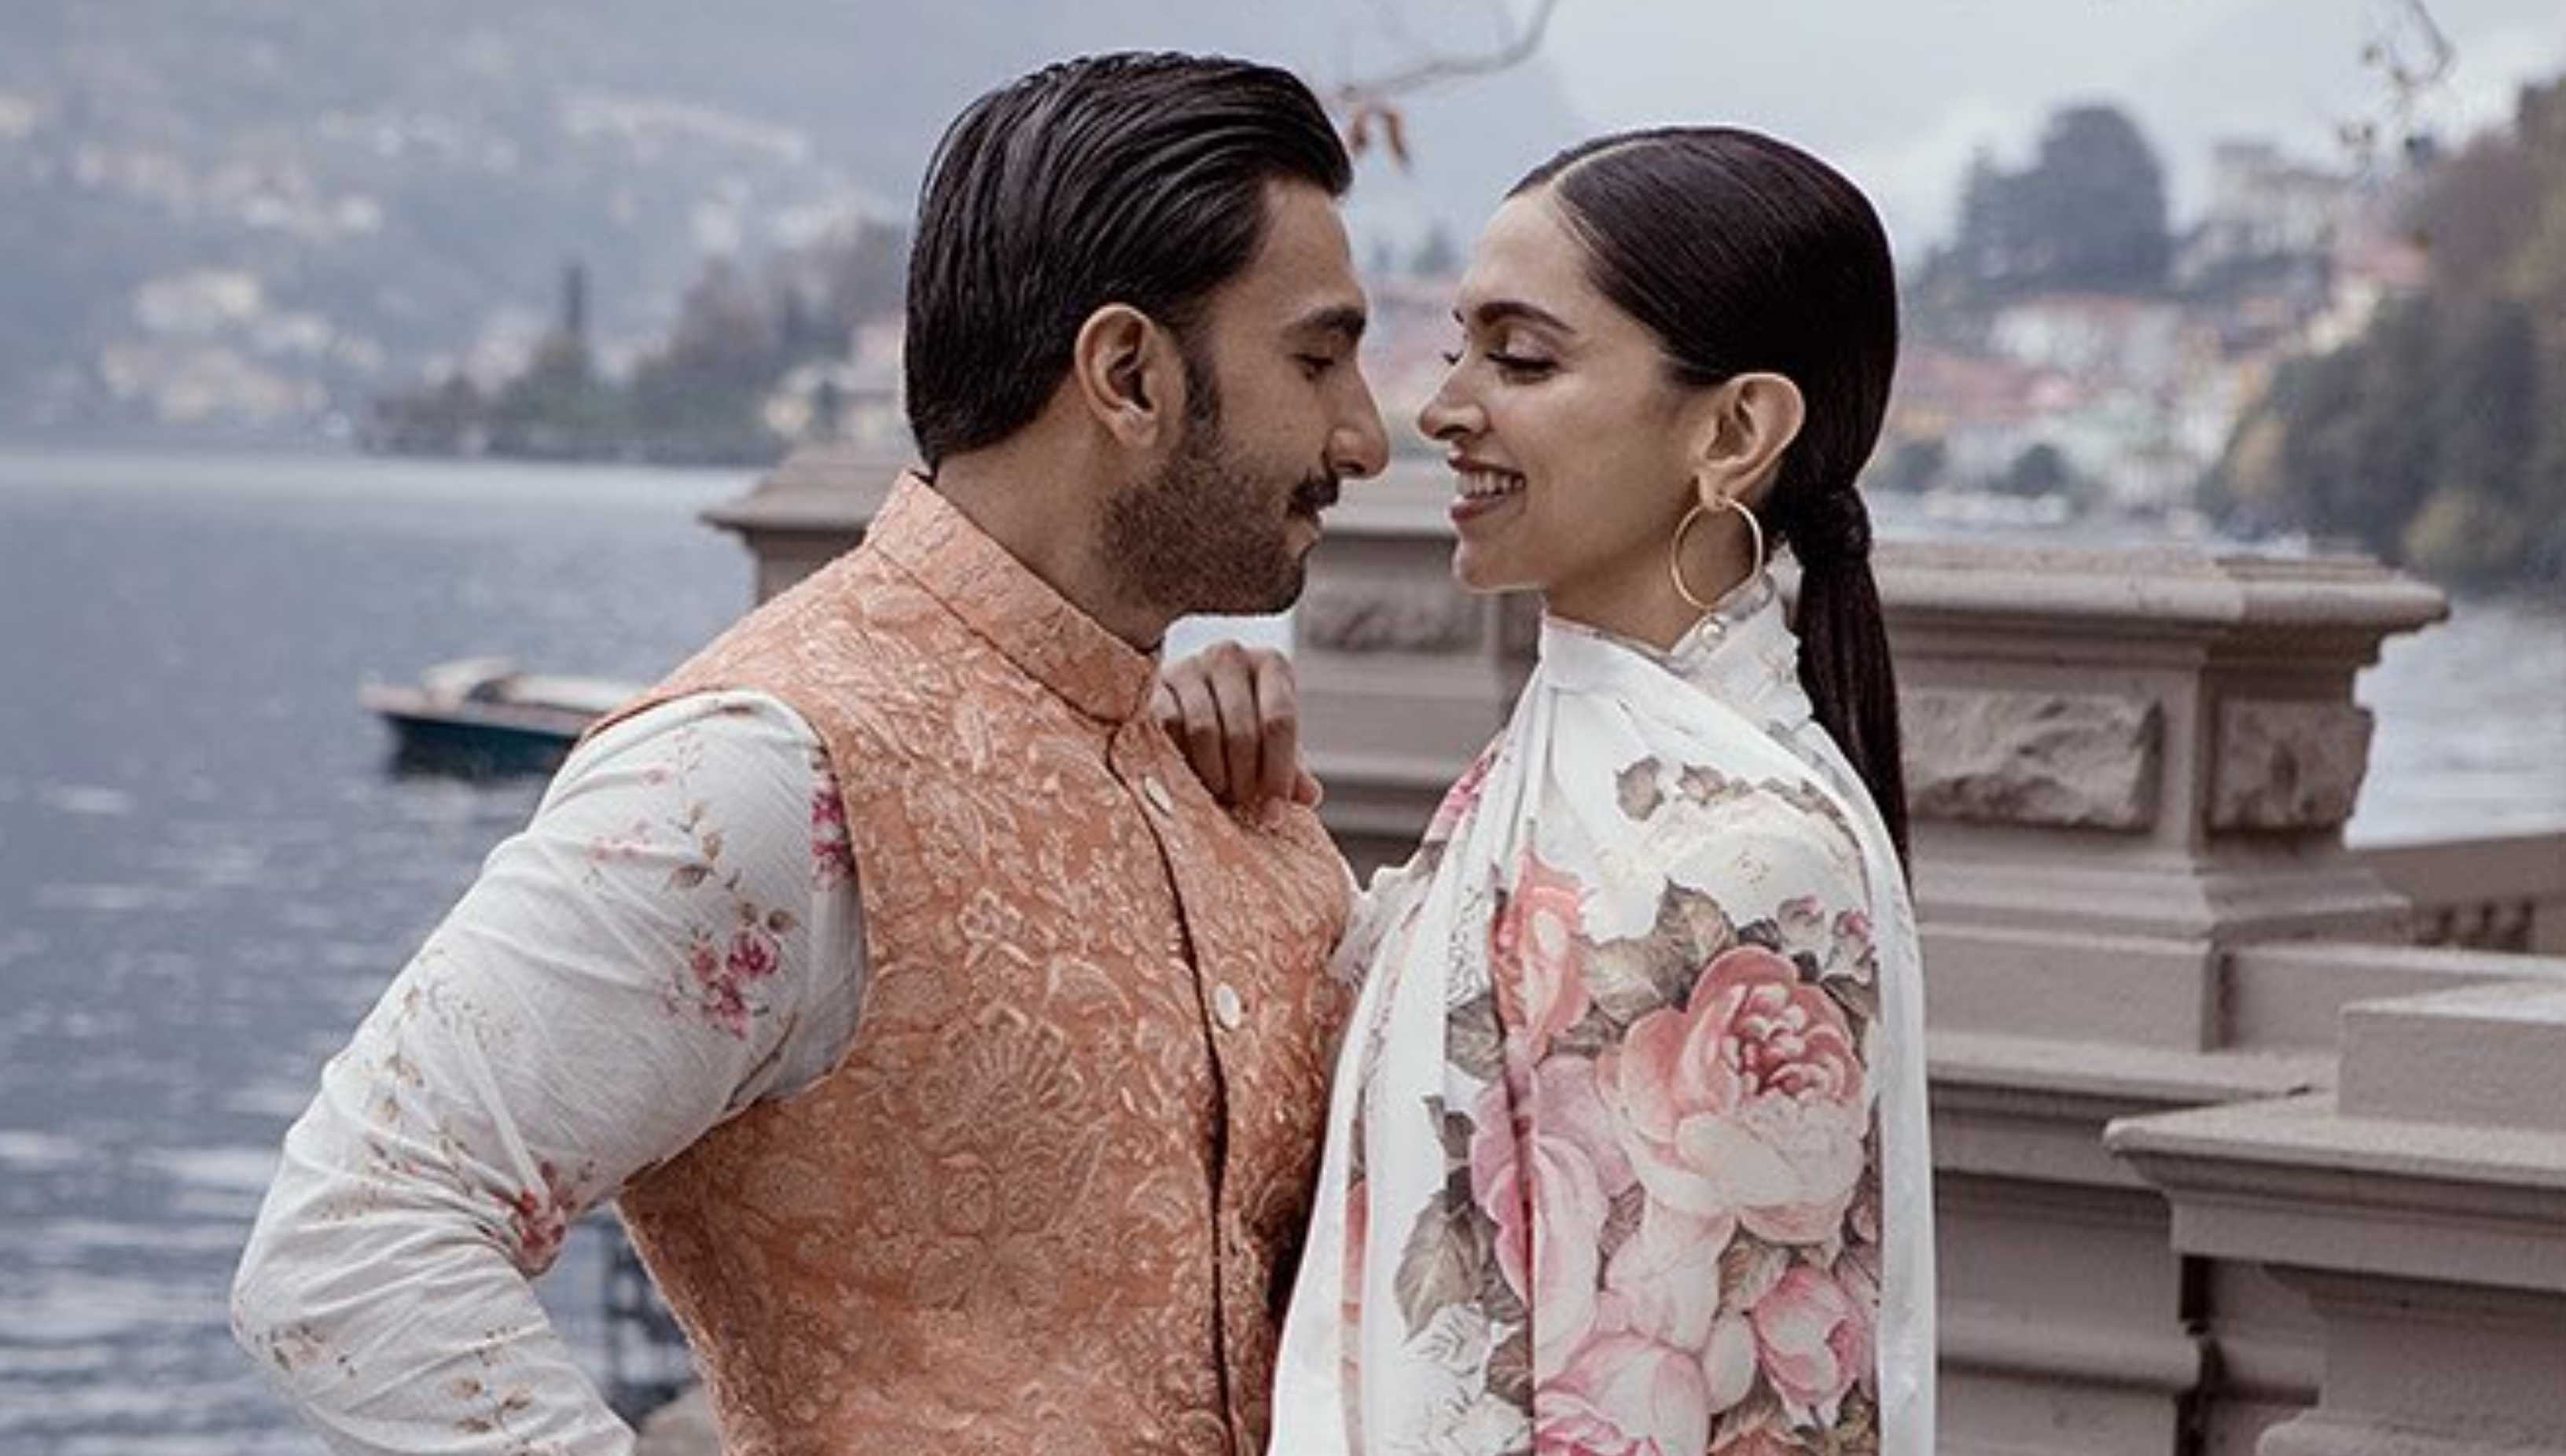 Ranveer Singh on Deepika Padukone decorating their new home: ‘She’s like a little girl with a doll house’